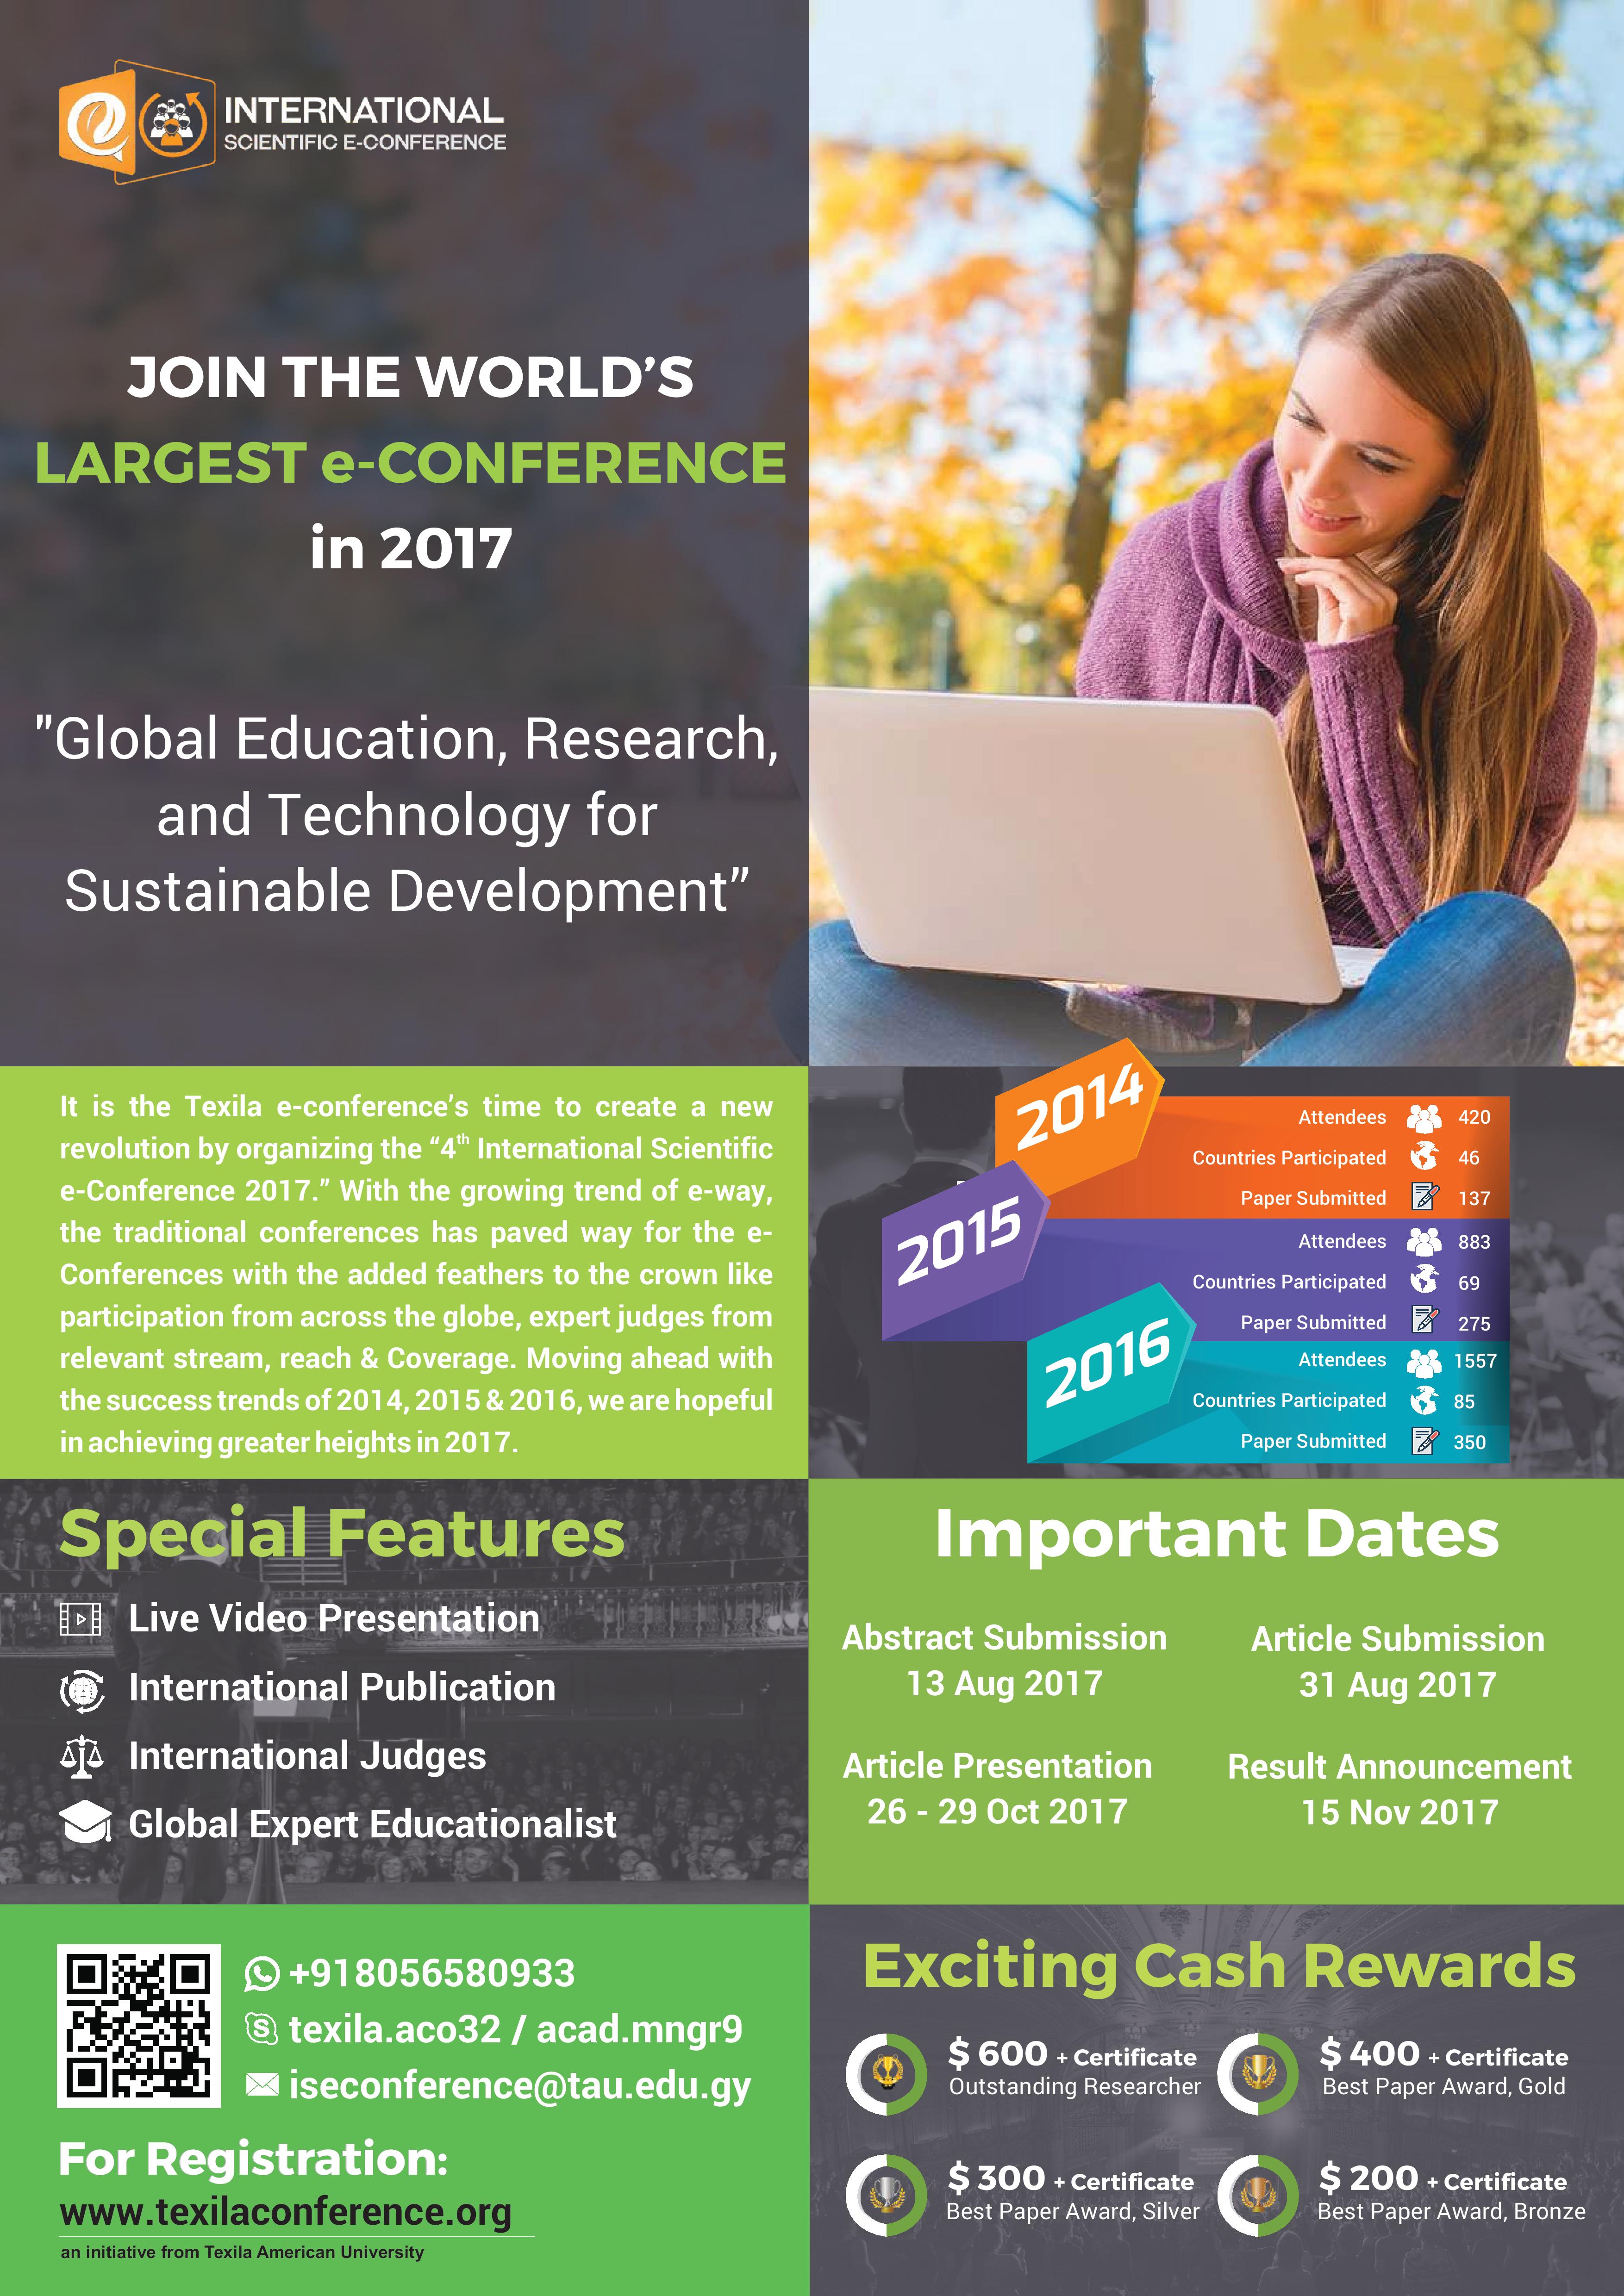 e-Conferencing has grown in popularity, researchers have found a way to increase their interactivity with renowned speakers. 
TAU is all set to conduct its 4th e-Conference on the topic - Global Education, Research, and Technology for Sustainable Development